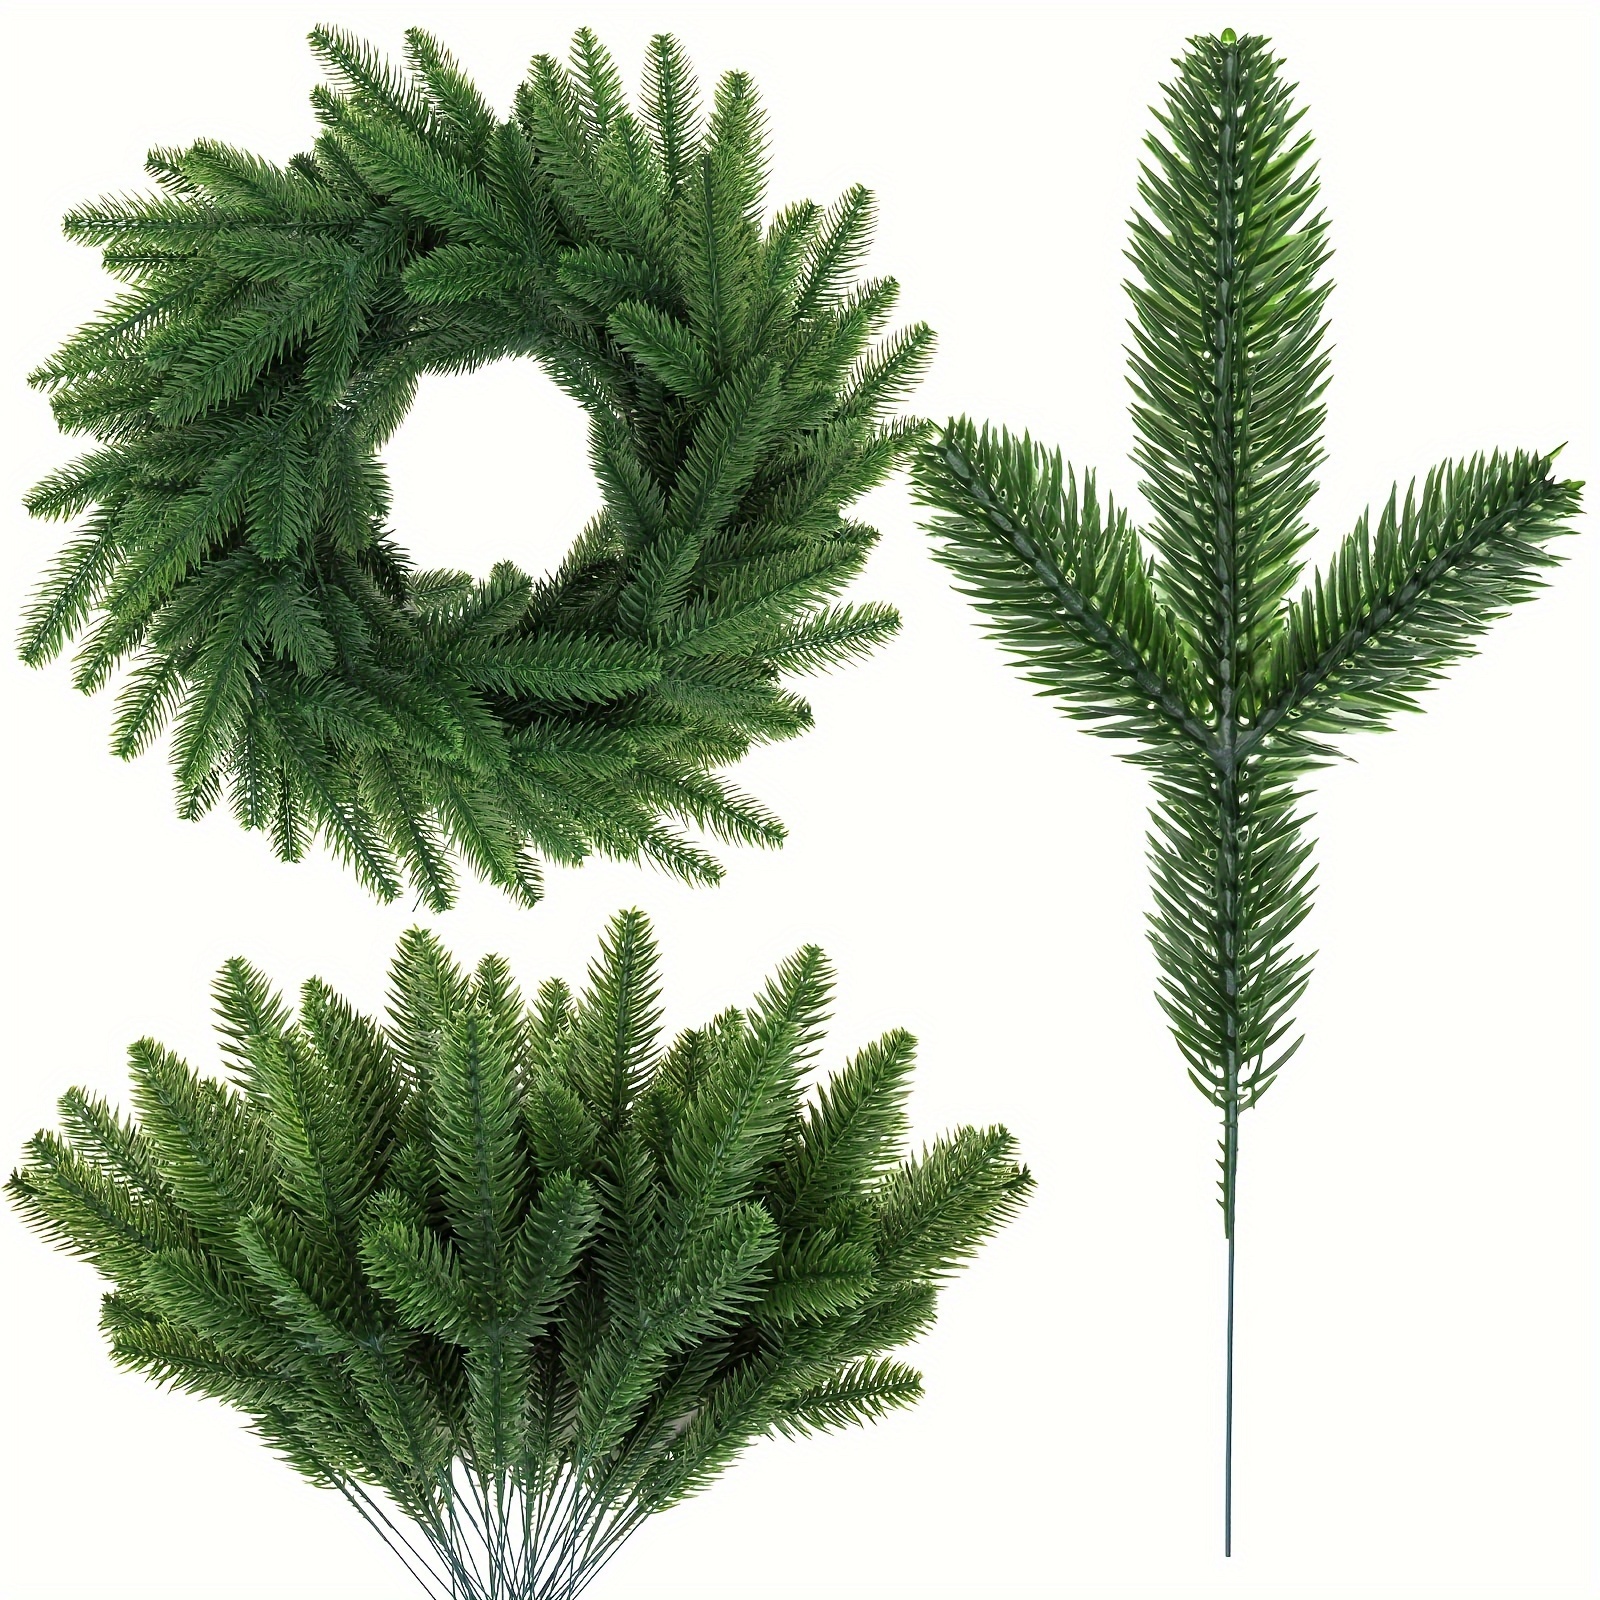 Artificial Green Pine Needles Branches - 10pcs for Wreath Decorations